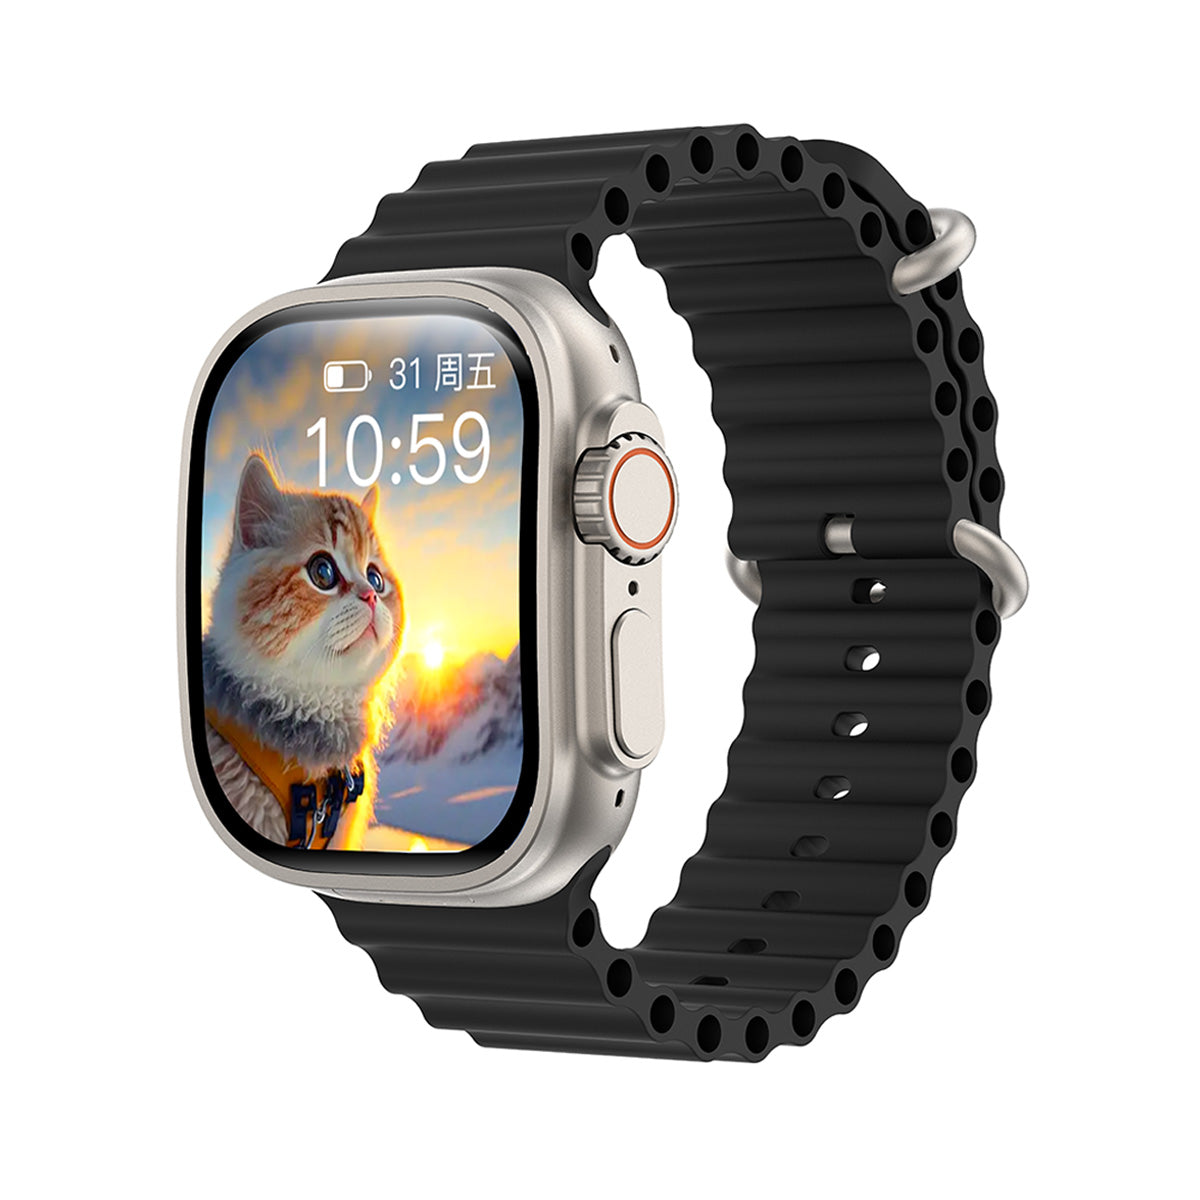 VWAR JC02 Ultra Smart Watch AMOLED Curved Screen Android System 2GB+16GB 4G WIFI GPS Camera